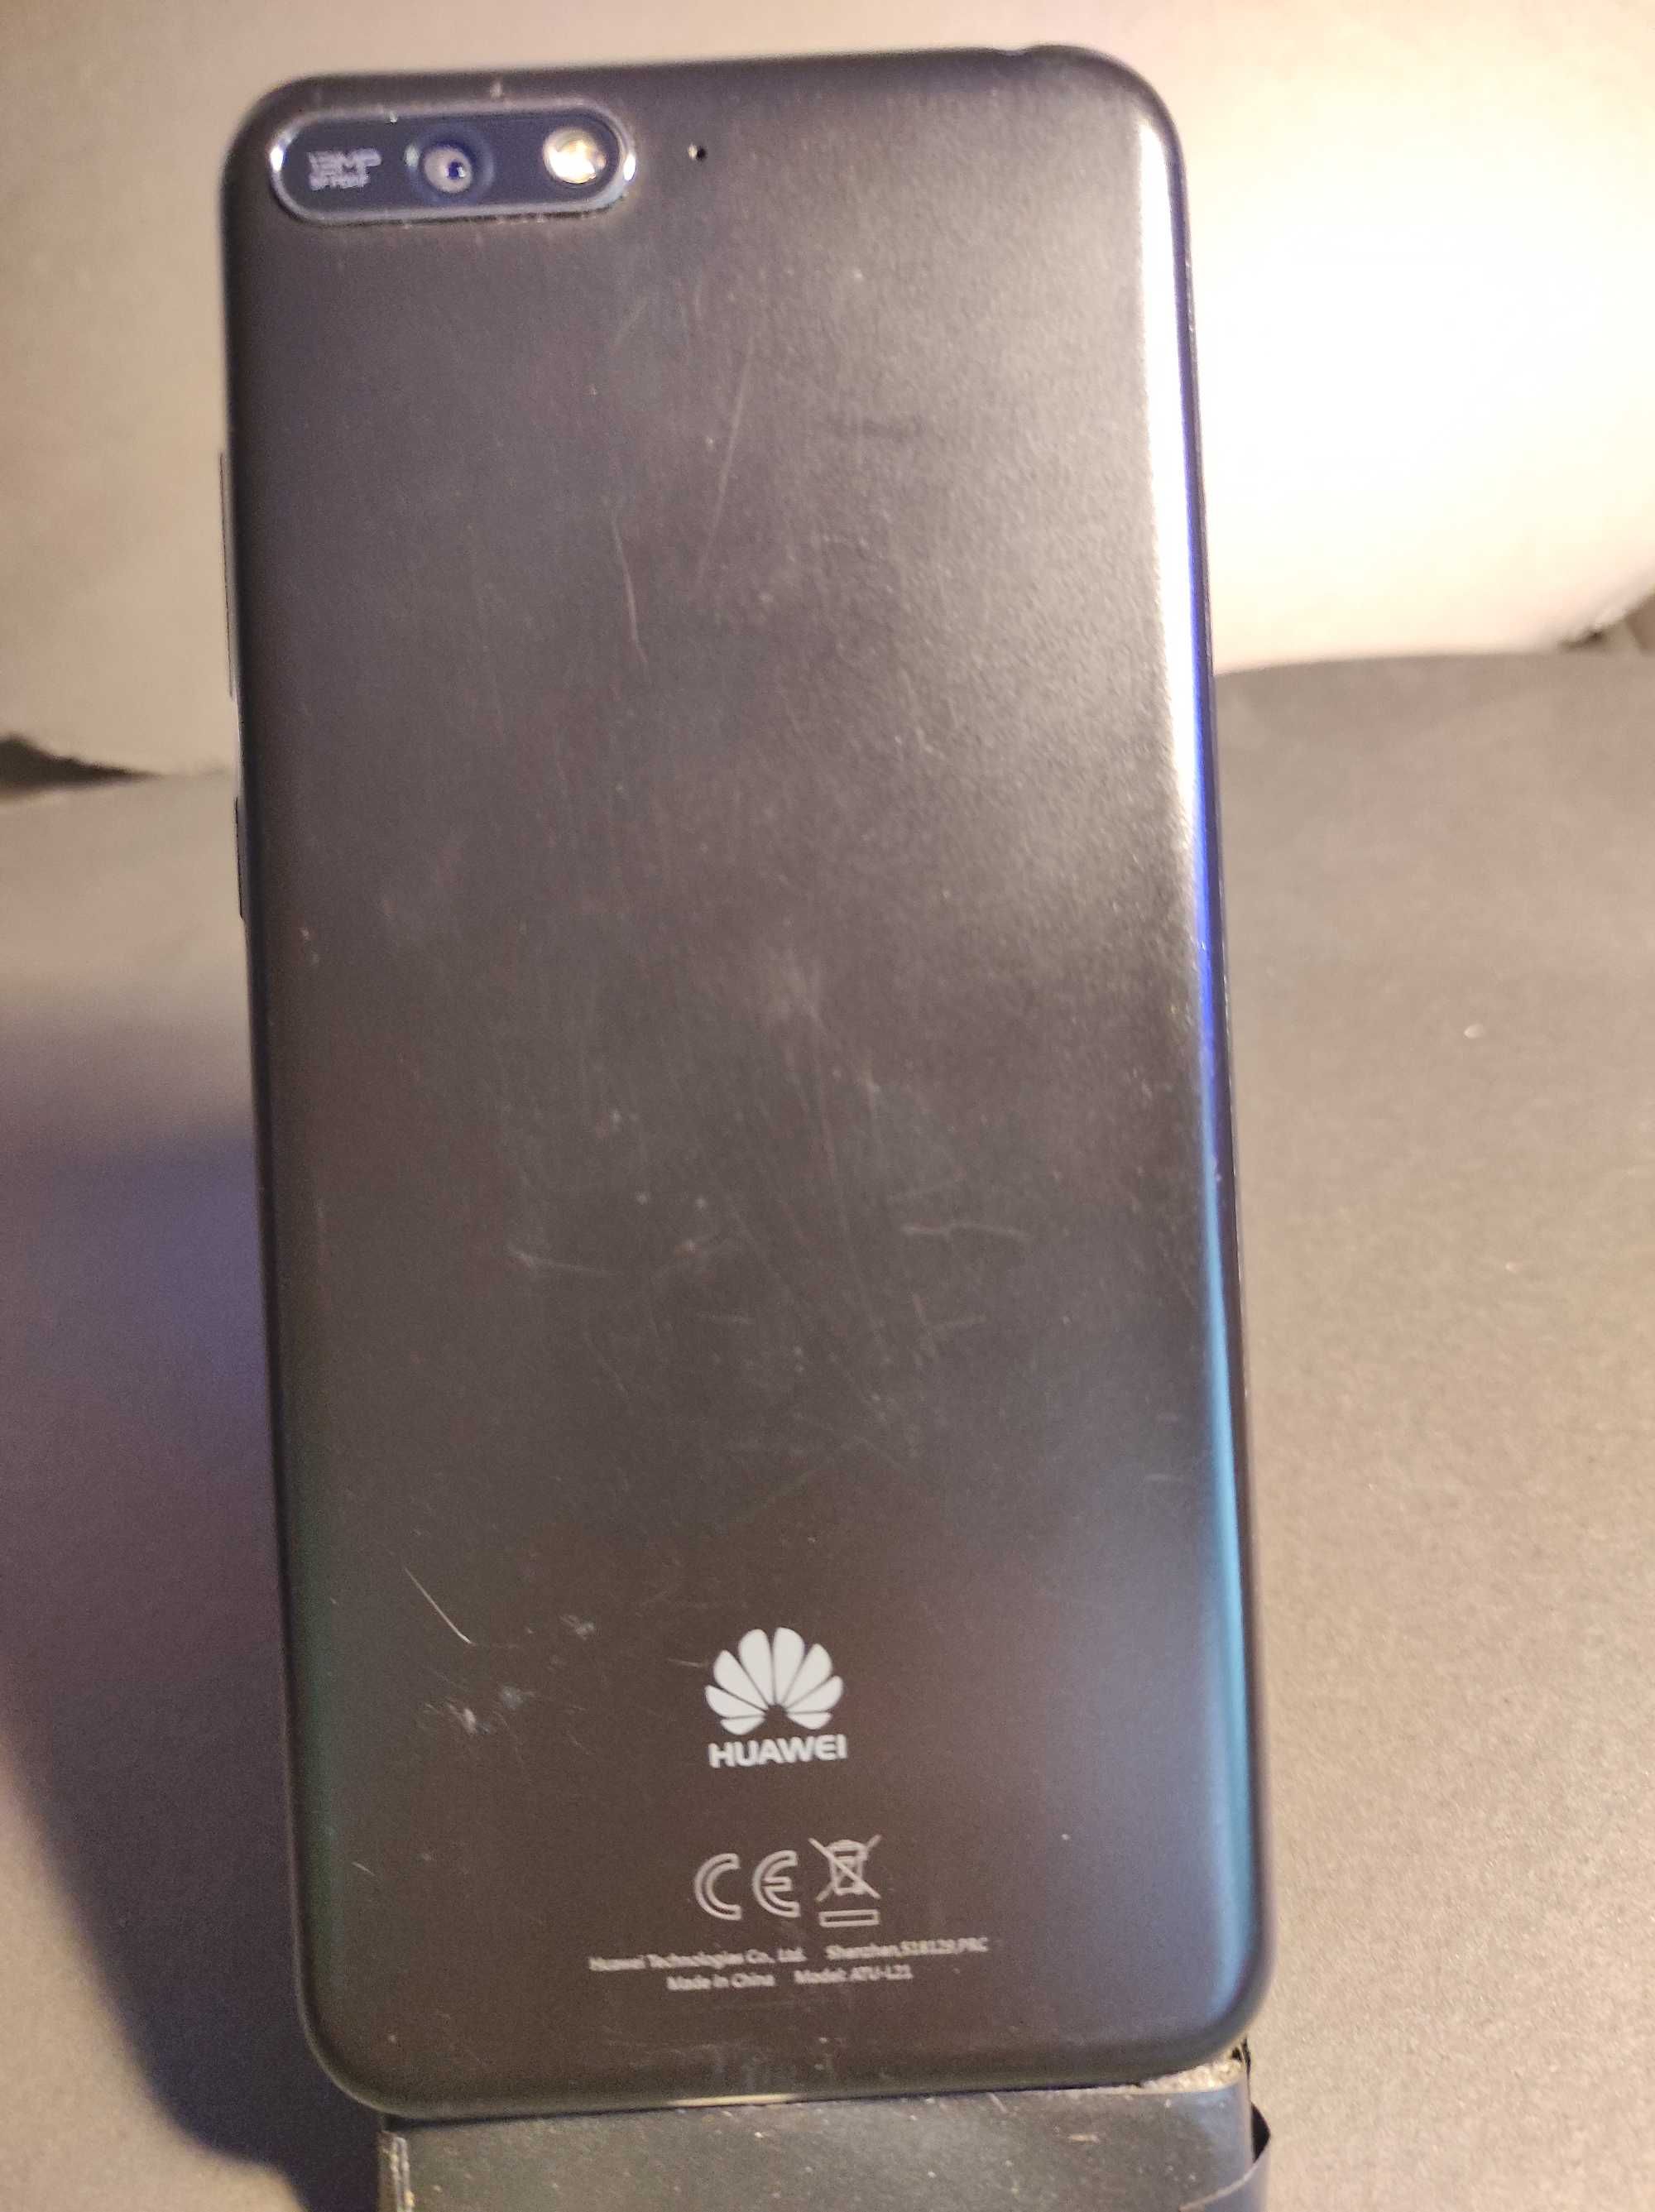 Huawei y6 2018 » Android